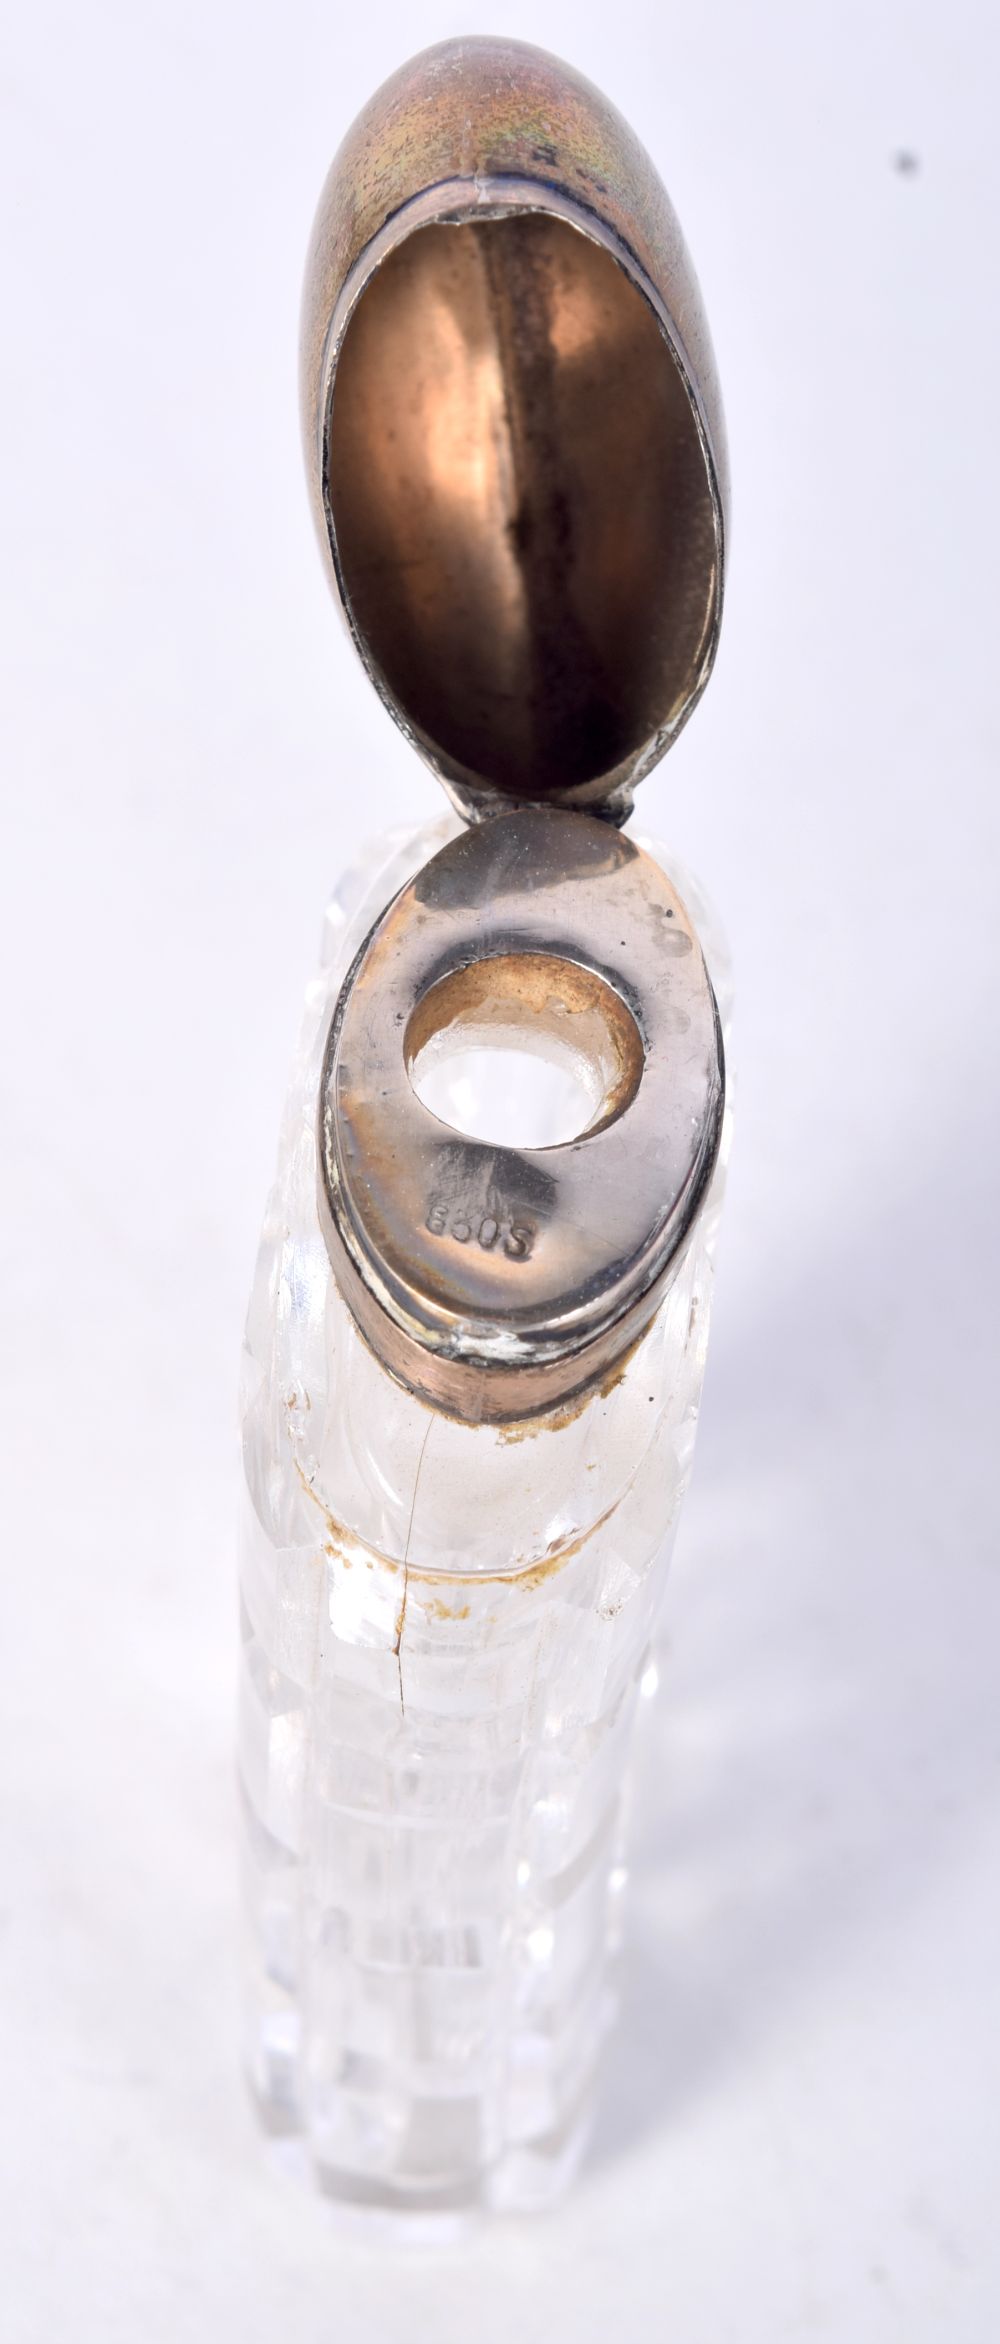 A SCENT BOTTLE. 7.9cm x 3.6cm x 1.6cm, weight 50.5g - Image 3 of 3